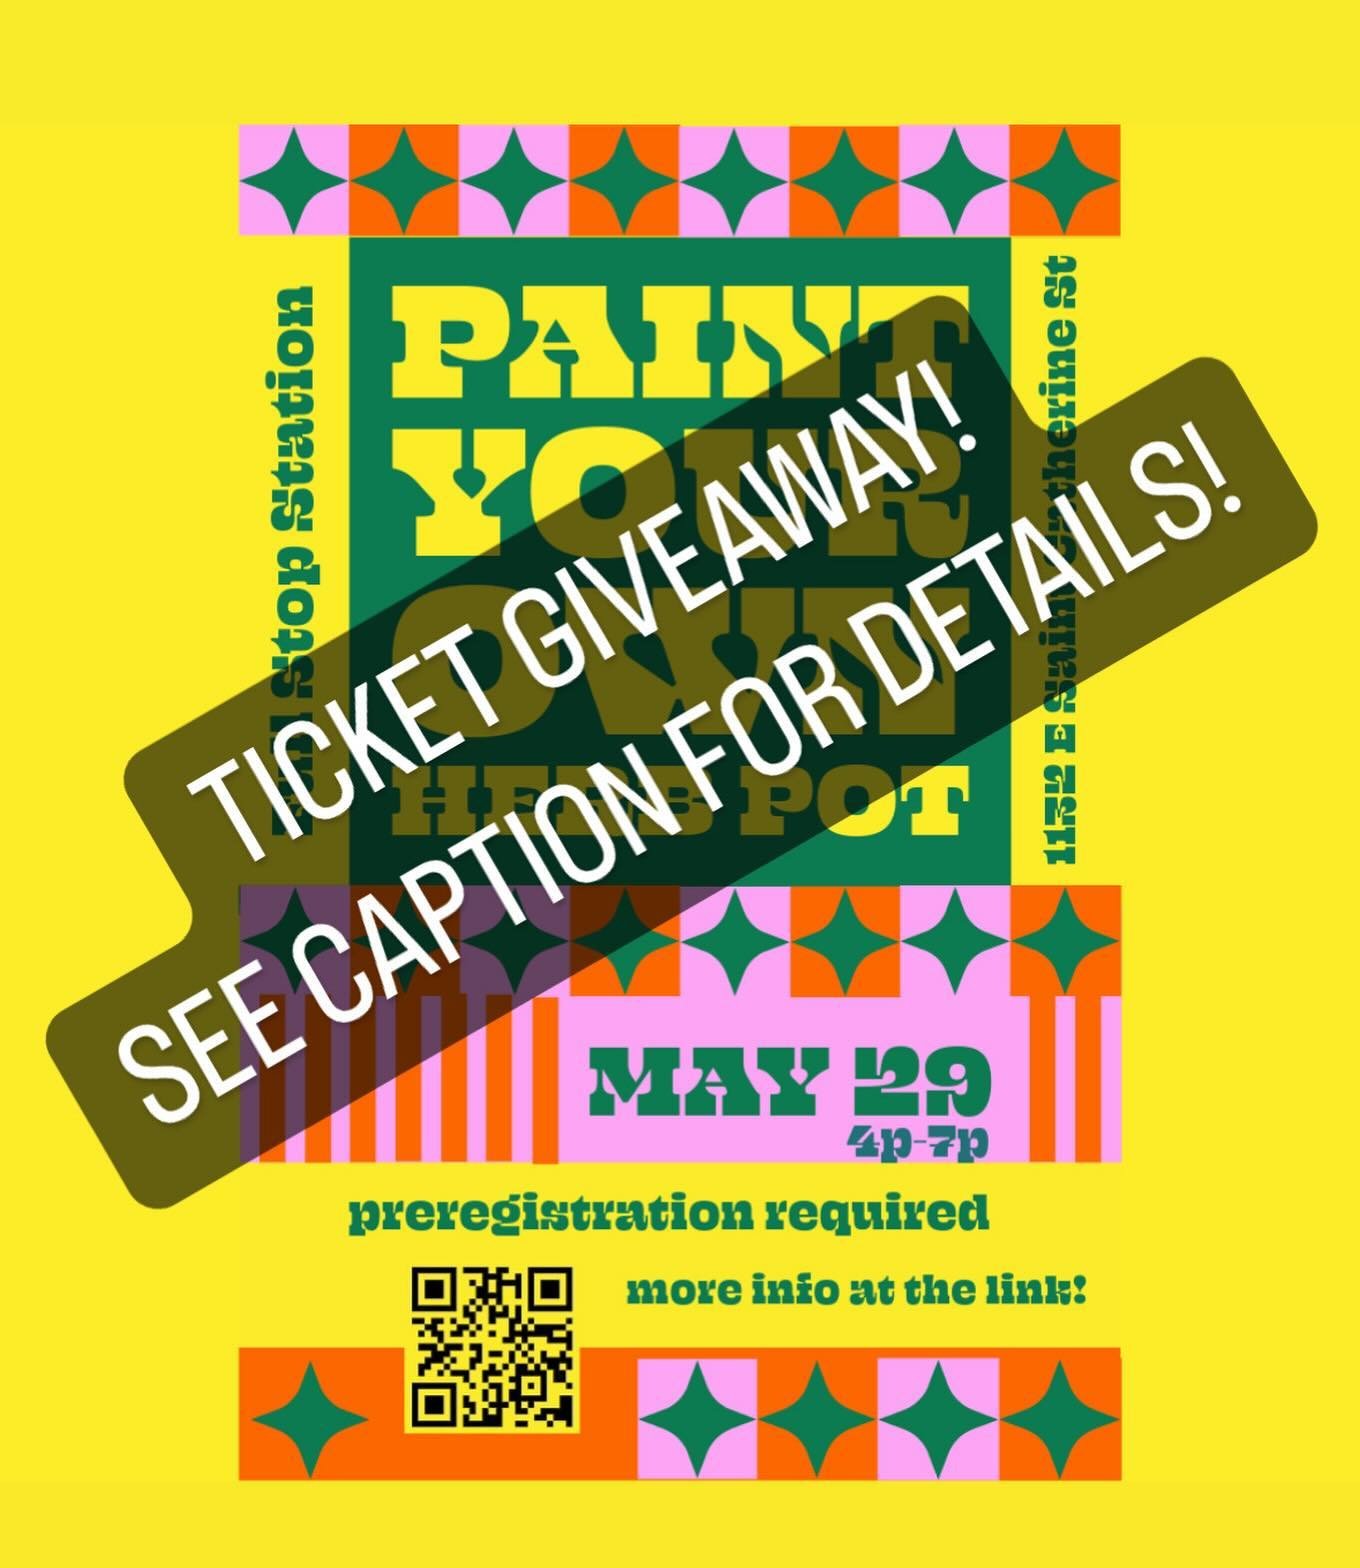 We are giving away a ticket to our Paint Your Own Pot event!!! It&rsquo;s a $30 value and comes with entry, a pot to paint, and beer tickets for the evening. 🥰

We are stoked for our very own @katierenzi to host this awesome event!! 

To enter, just